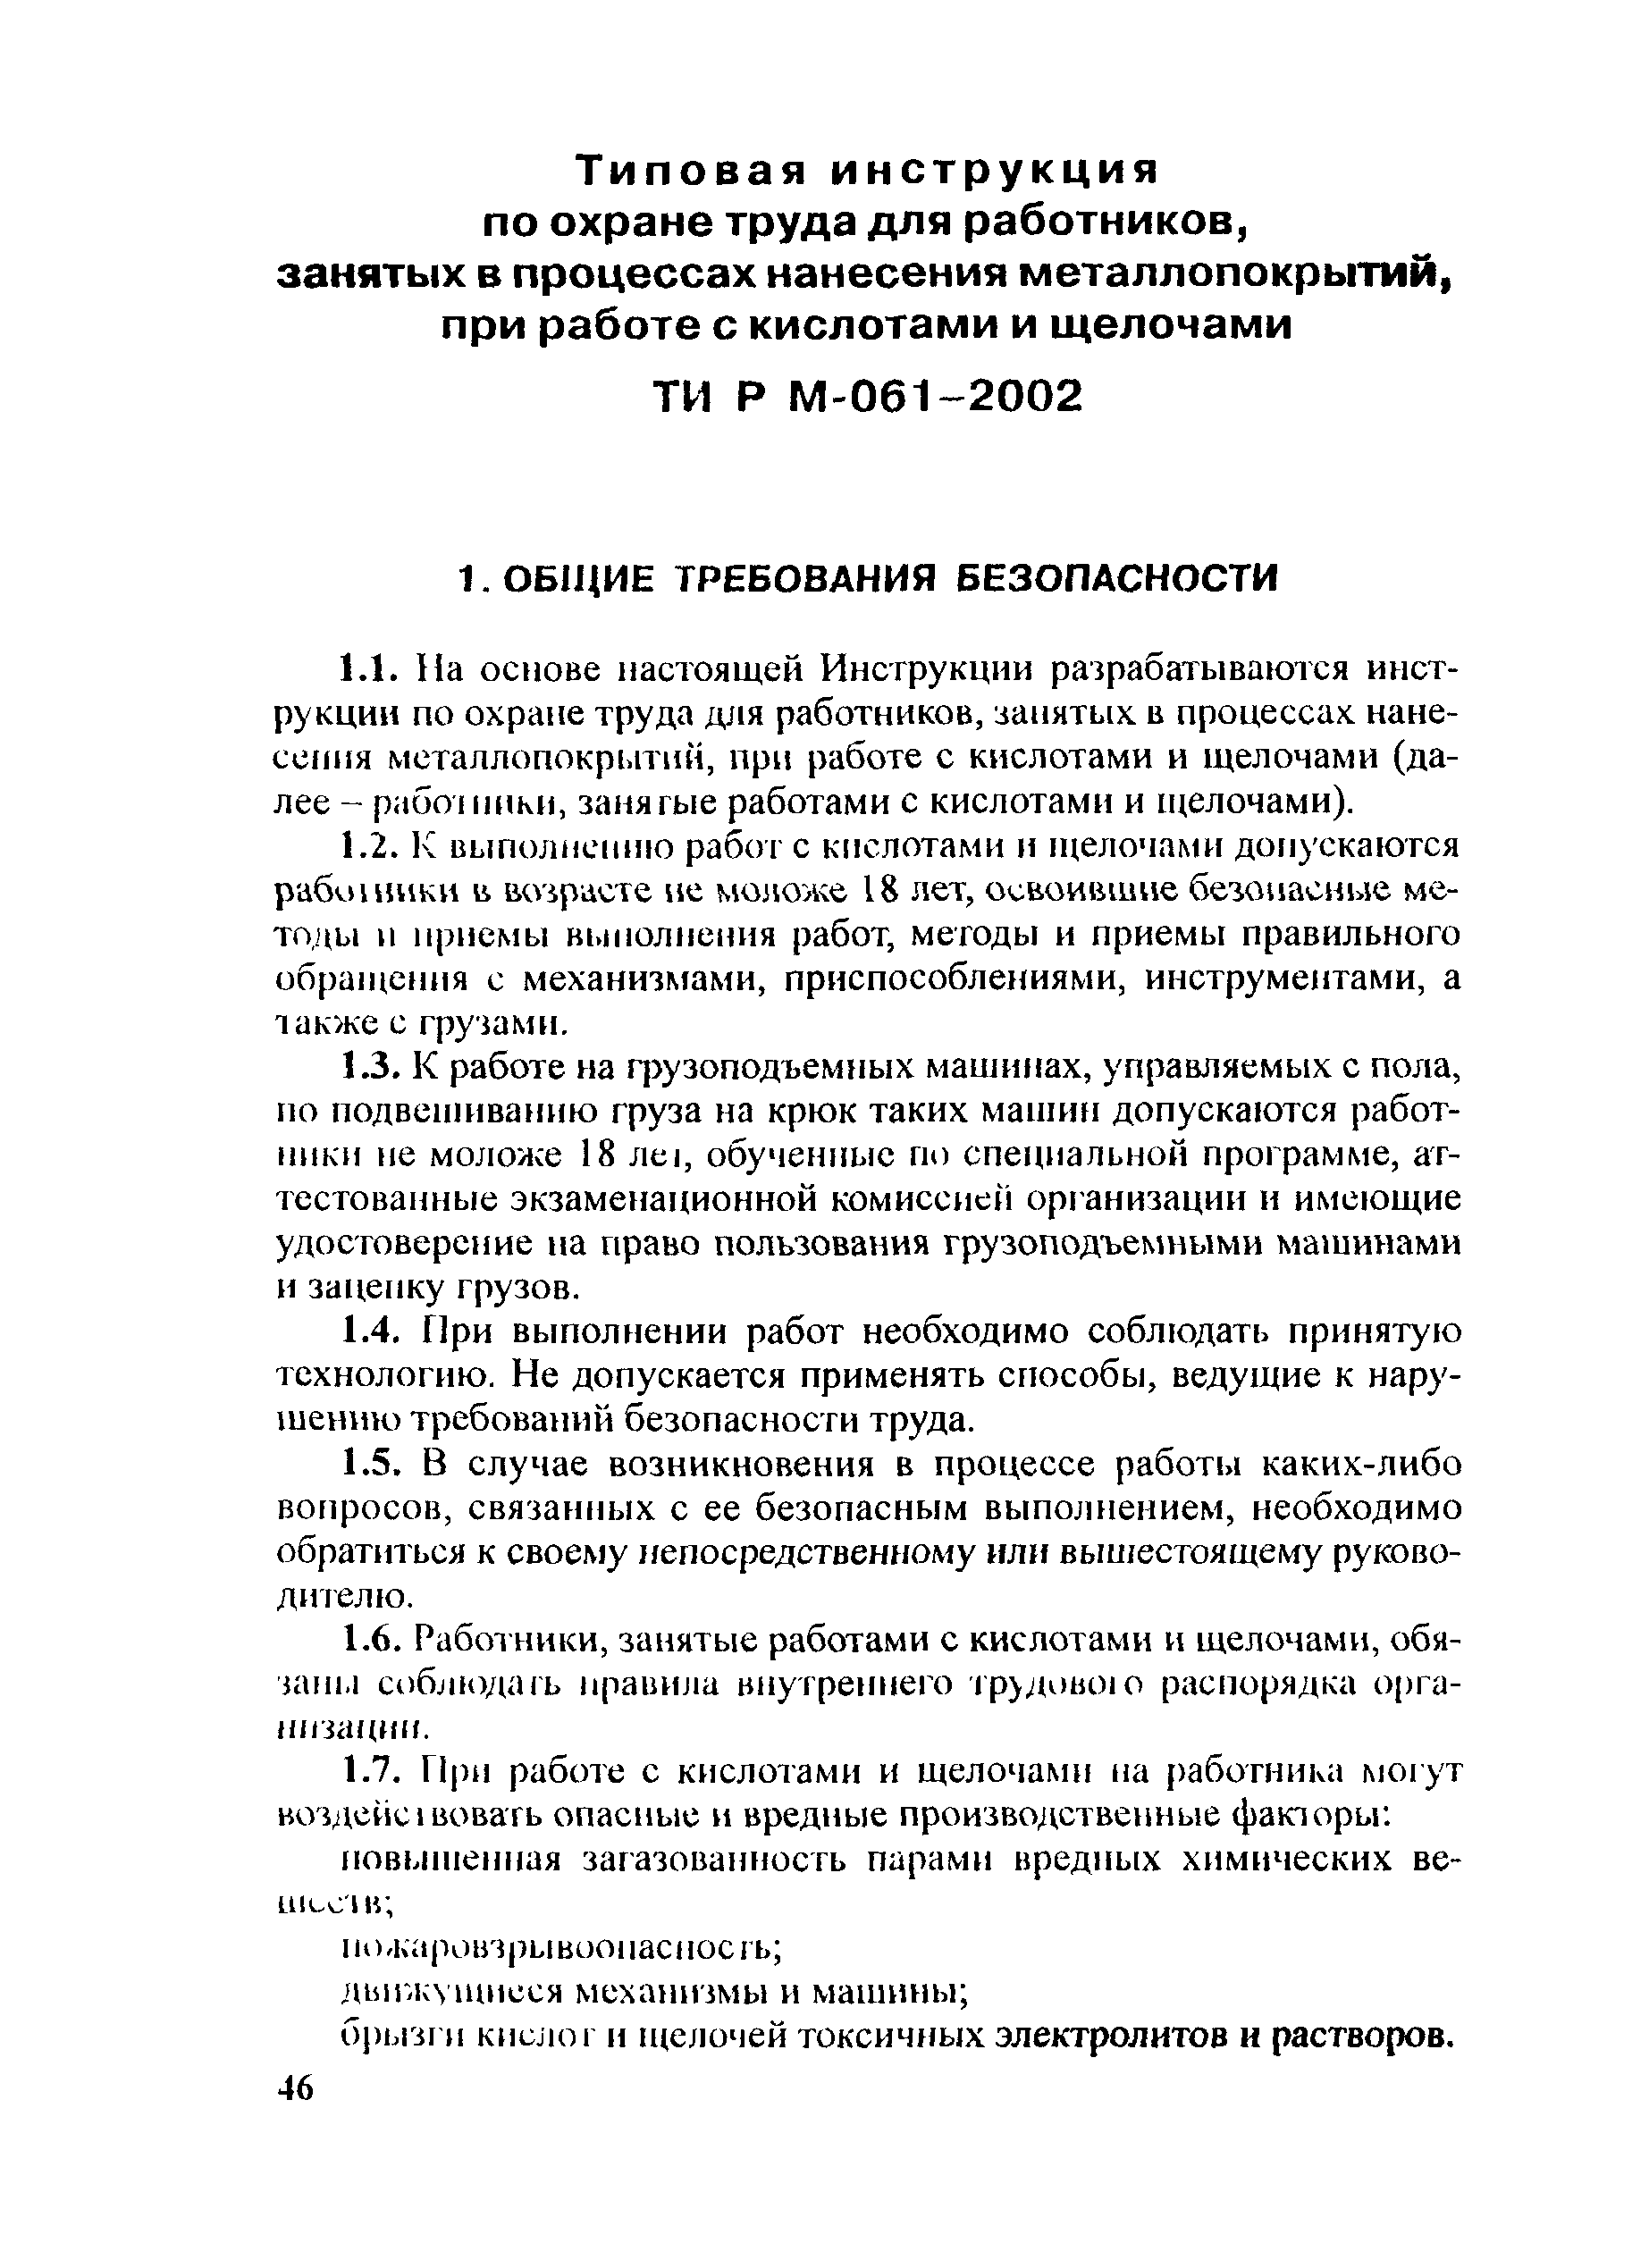 ТИ Р М-061-2002